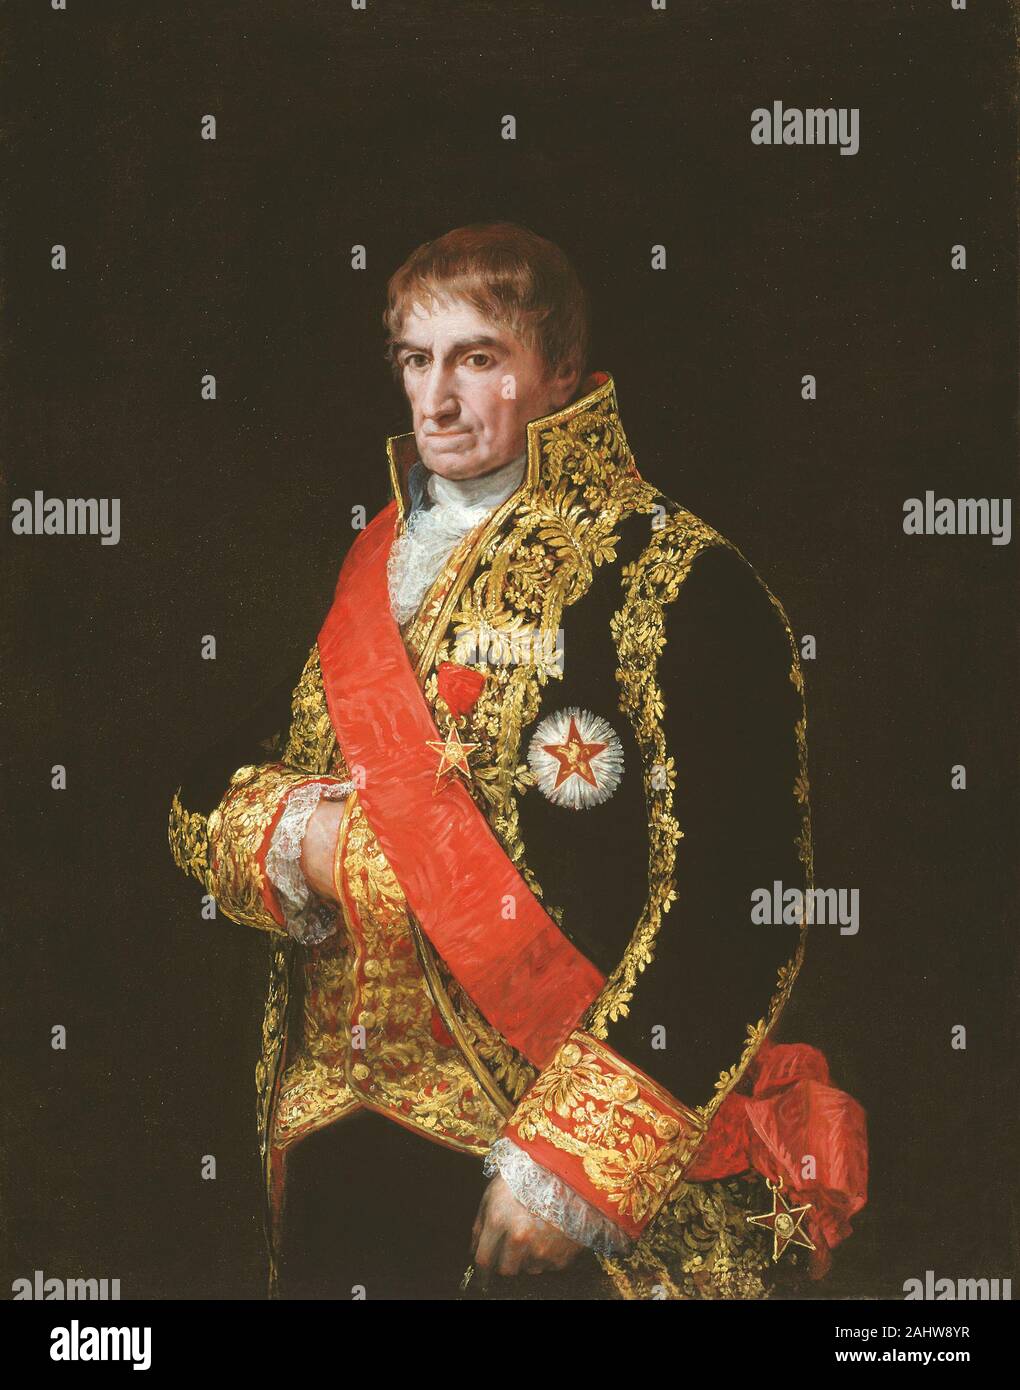 Francisco José de Goya y Lucientes. Portrait of General José Manuel Romero. 1805–1815. Spain. Oil on canvas The early 19th century was a troubled time in Spain. After Napoleon placed his brother, Joseph Bonaparte, on the Spanish throne in 1808, the people rose up in rebellion, eventually driving the French out with the help of the British army. Although his own sentiments were patriotic and liberal, Francisco de Goya dutifully fulfilled his obligations as first painter to the king. This is a portrait of José Manuel Romero, a minister under Joseph Bonaparte, although the degree to which the man Stock Photo